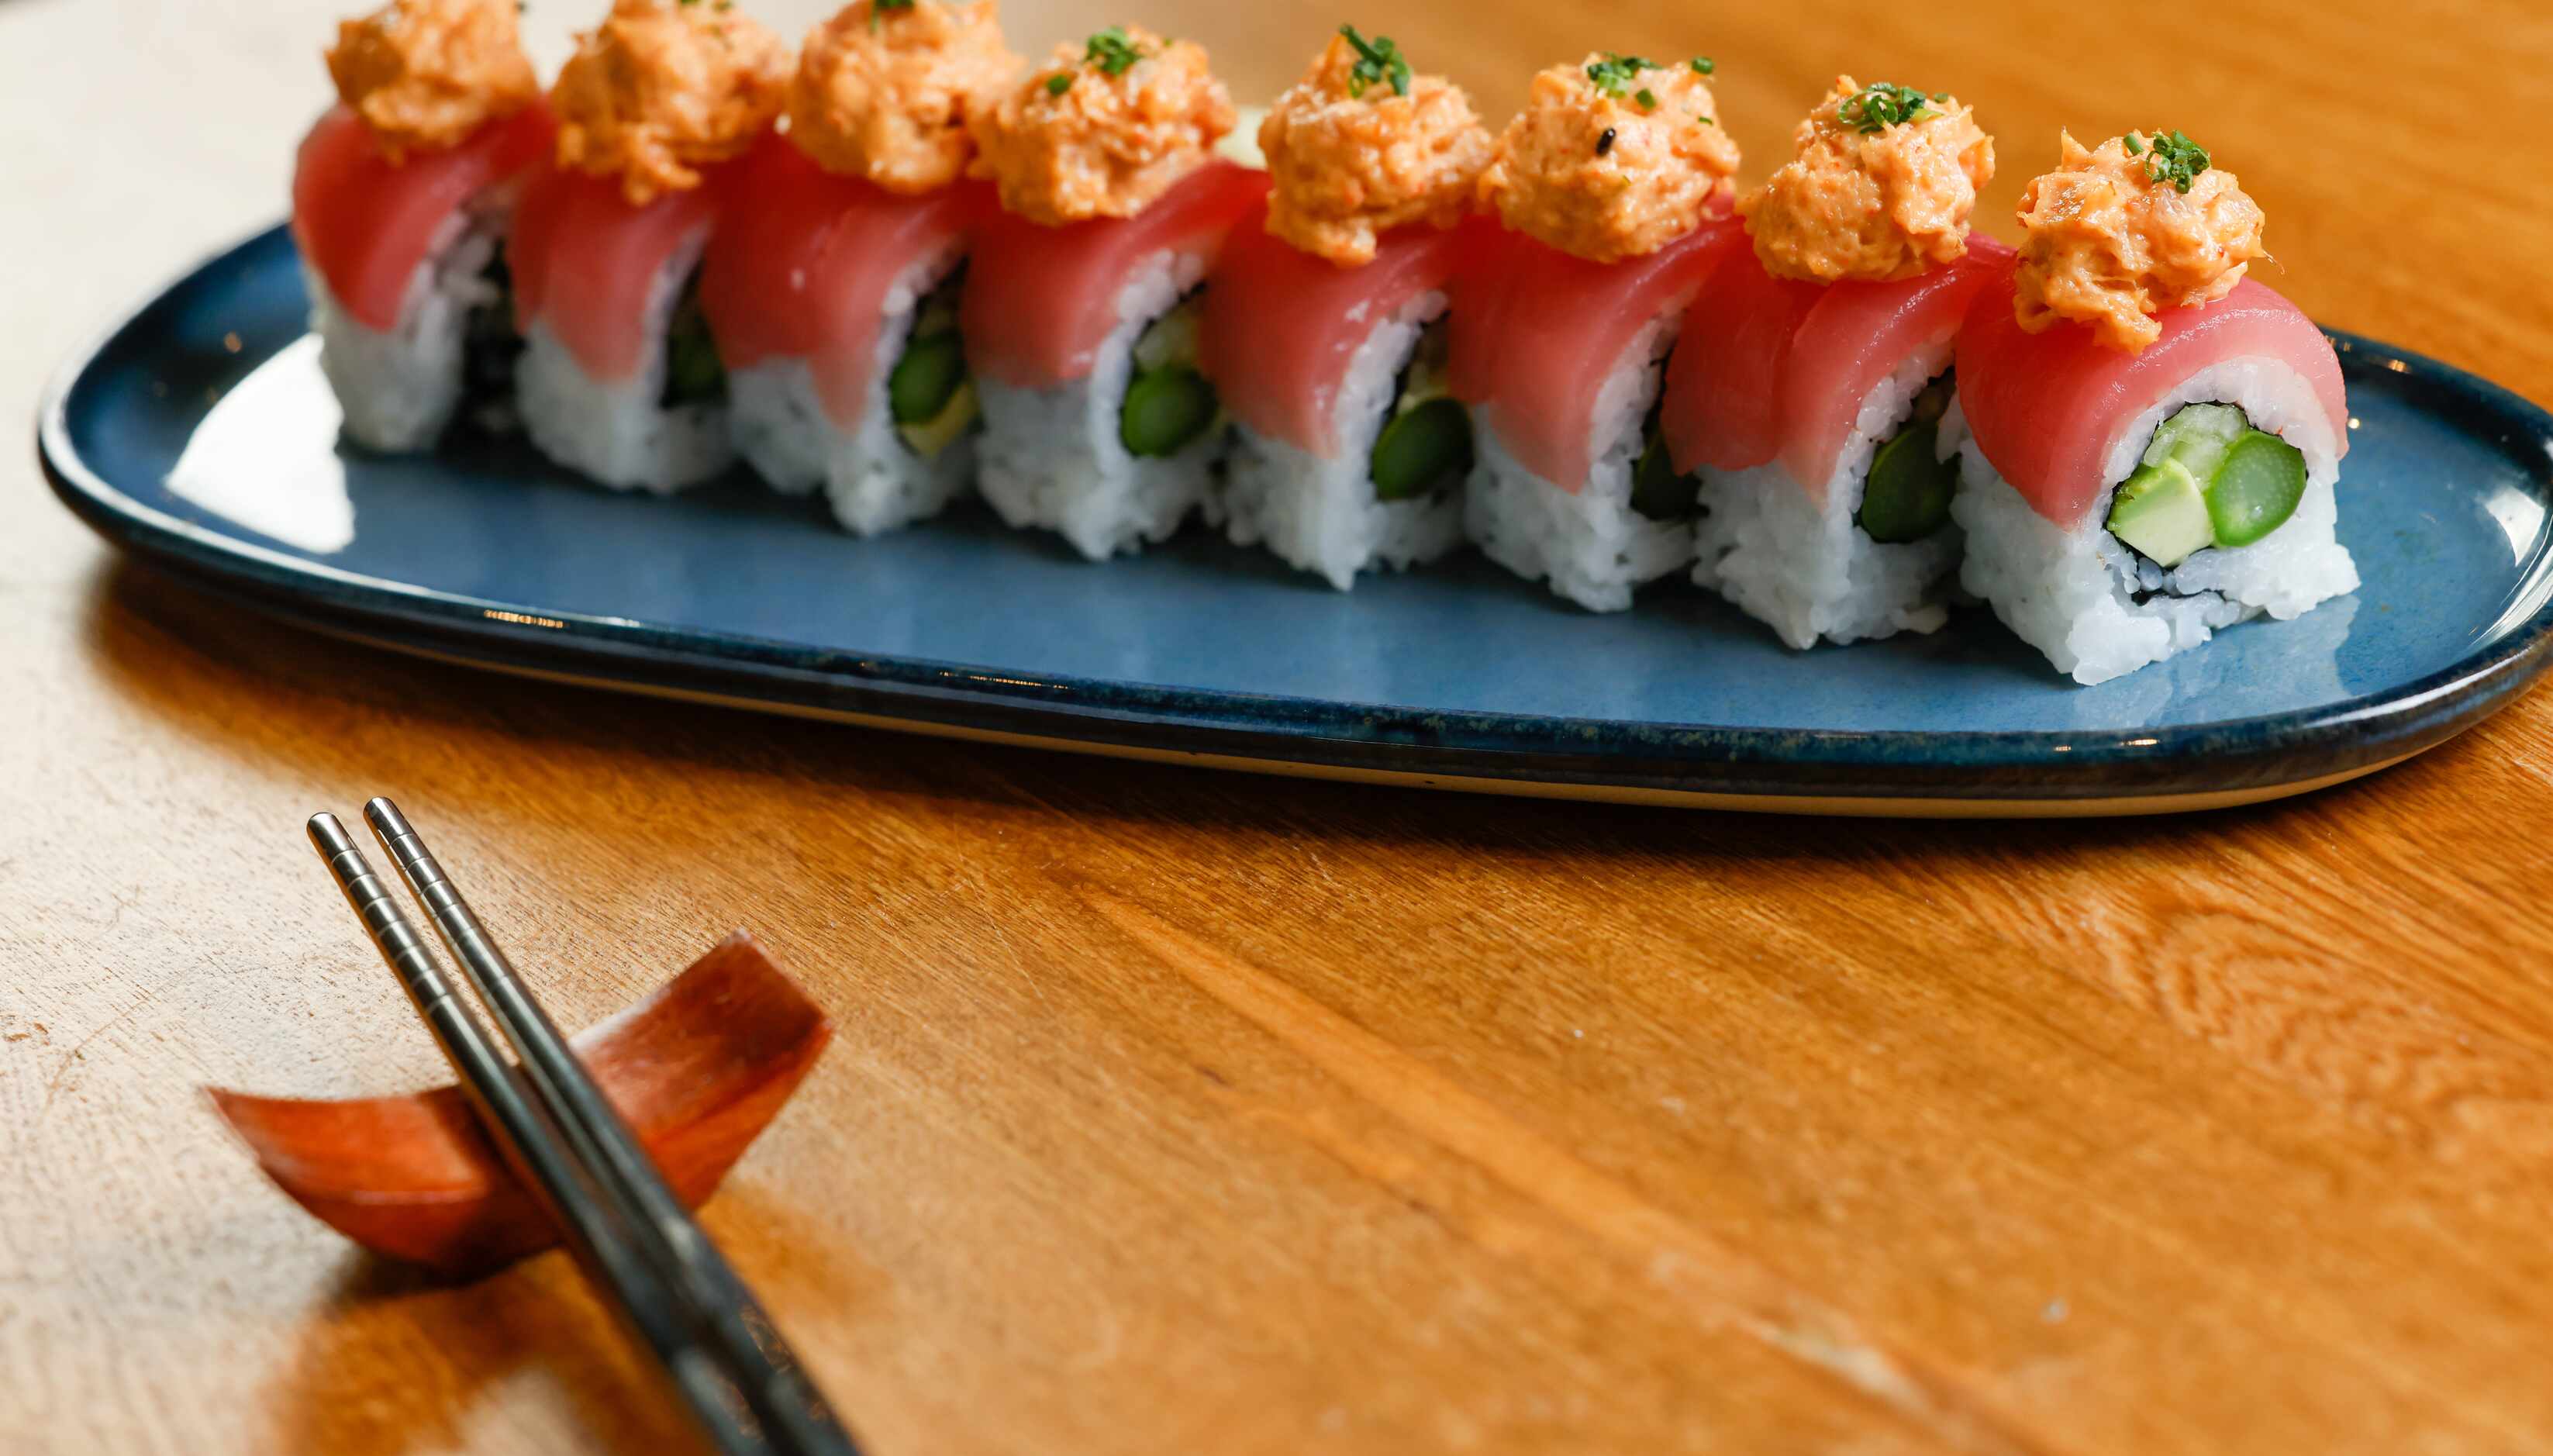 A spicy double tuna roll is an option among the raw fish dishes at Quince in Fort Worth.